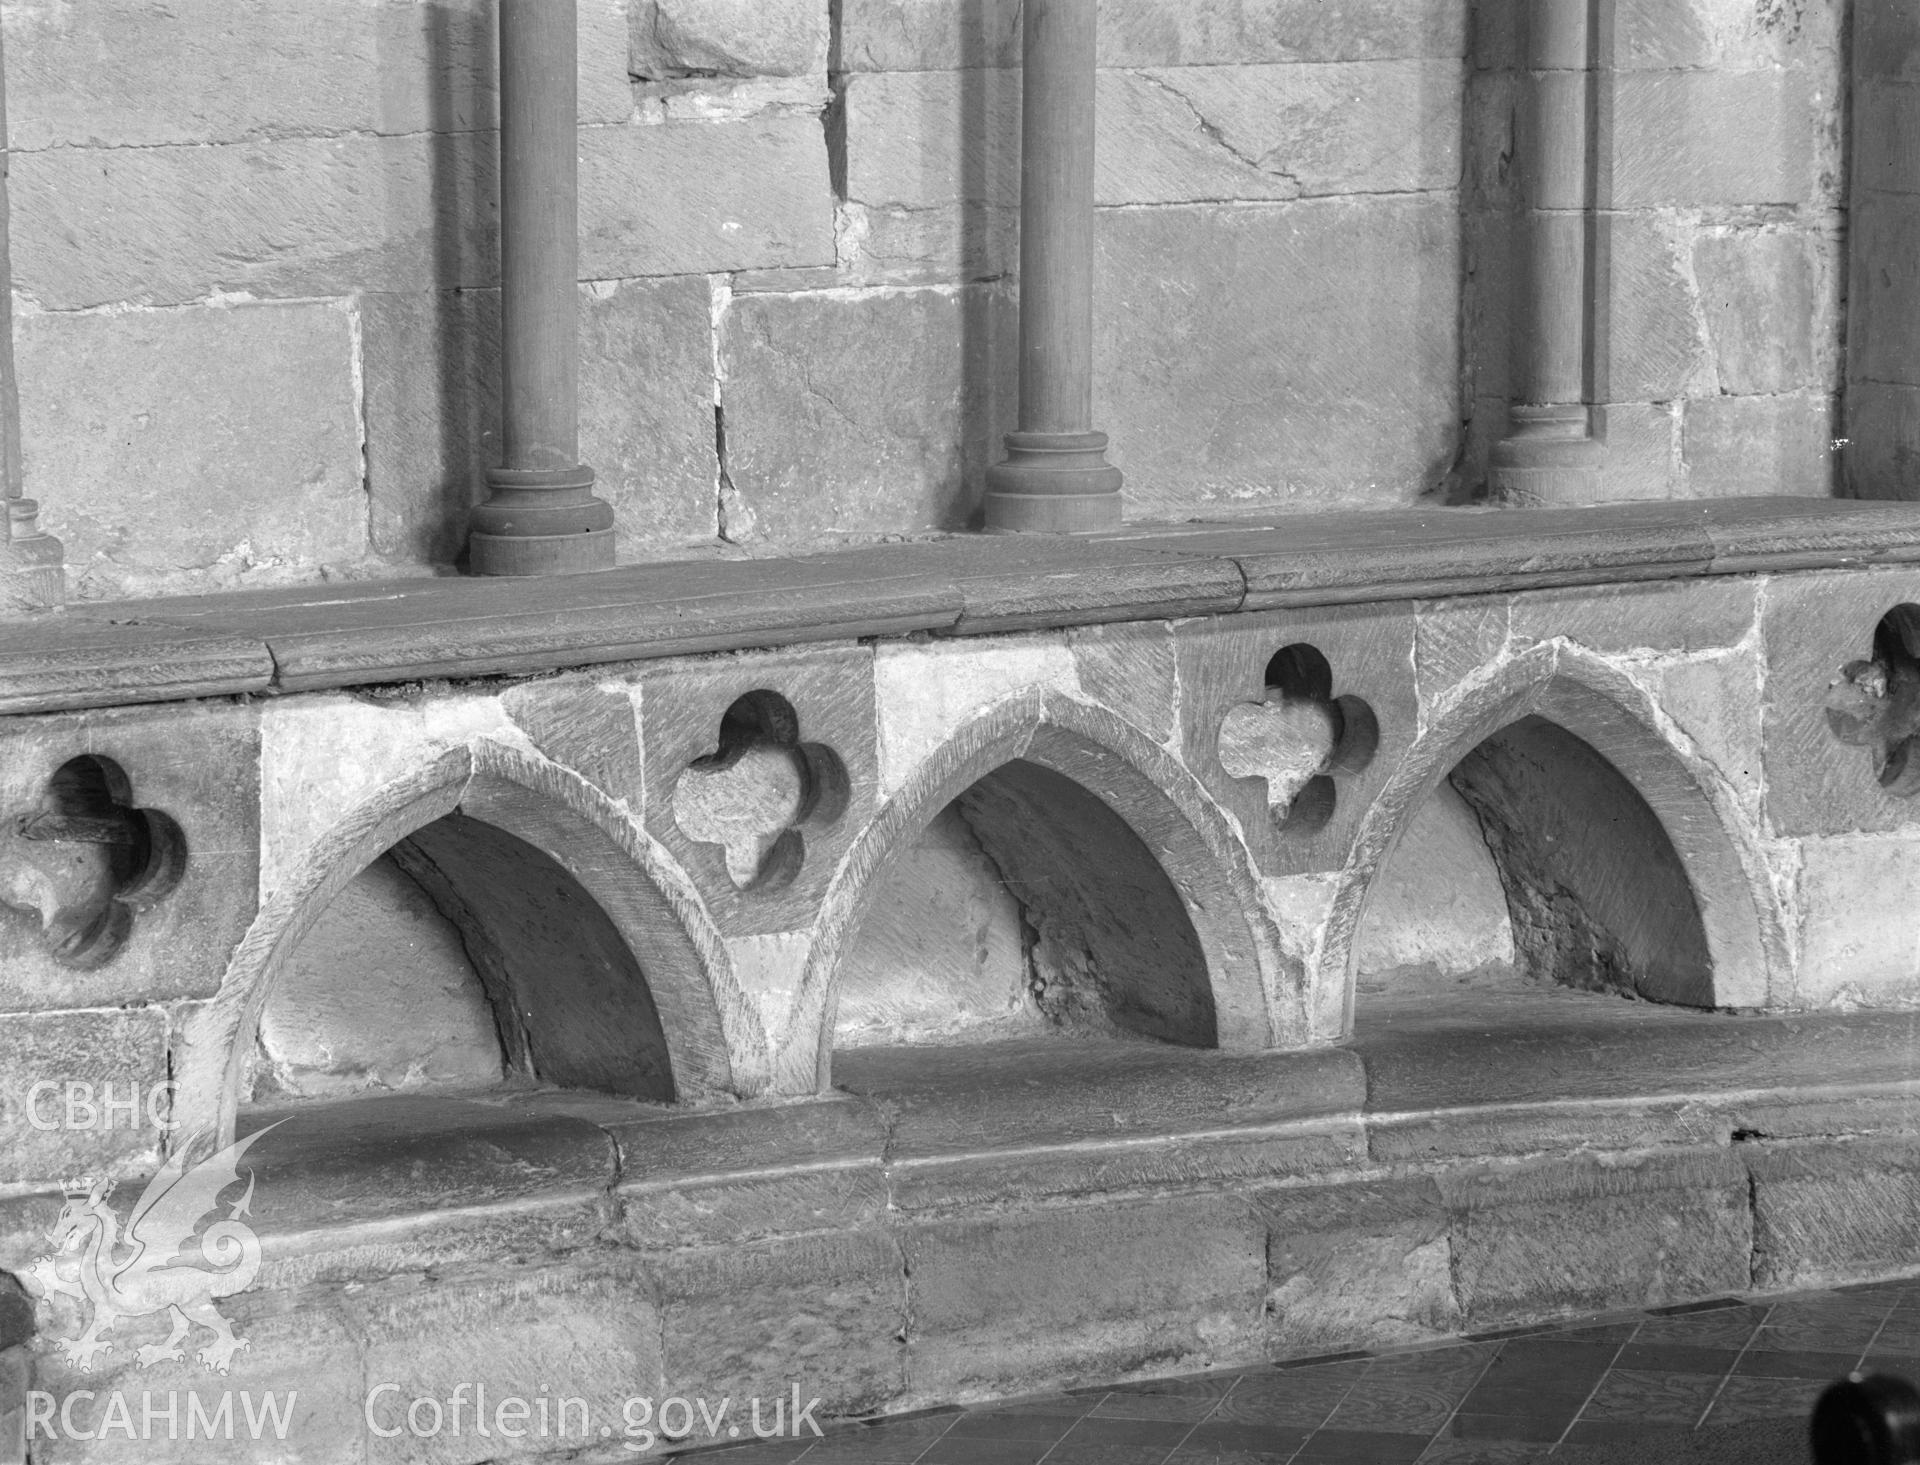 Digital copy of a black and white nitrate negative showing detail of interior stonework at St. David's Cathedral, taken by E.W. Lovegrove, July 1936.